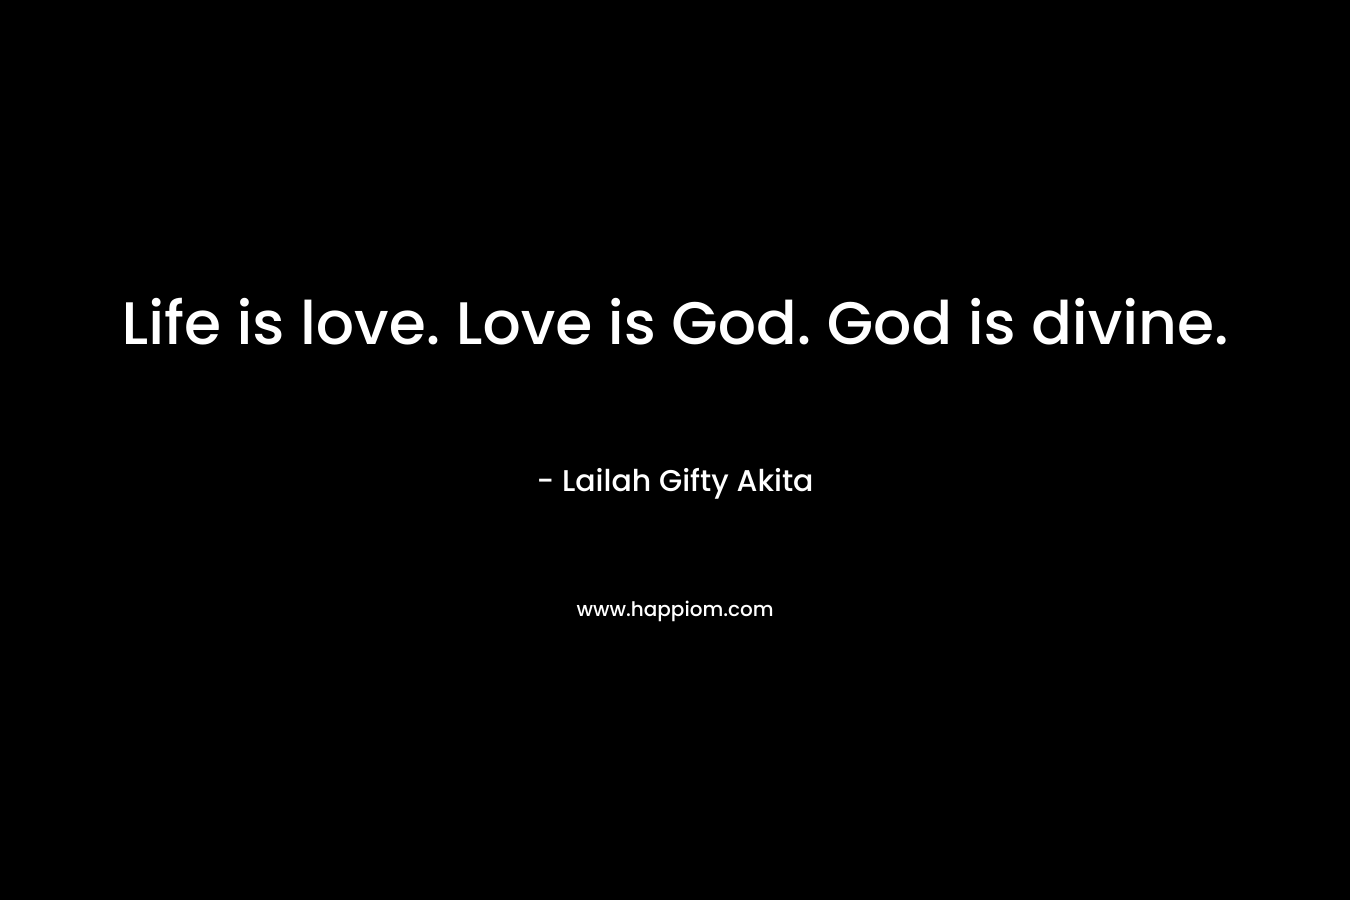 Life is love. Love is God. God is divine.